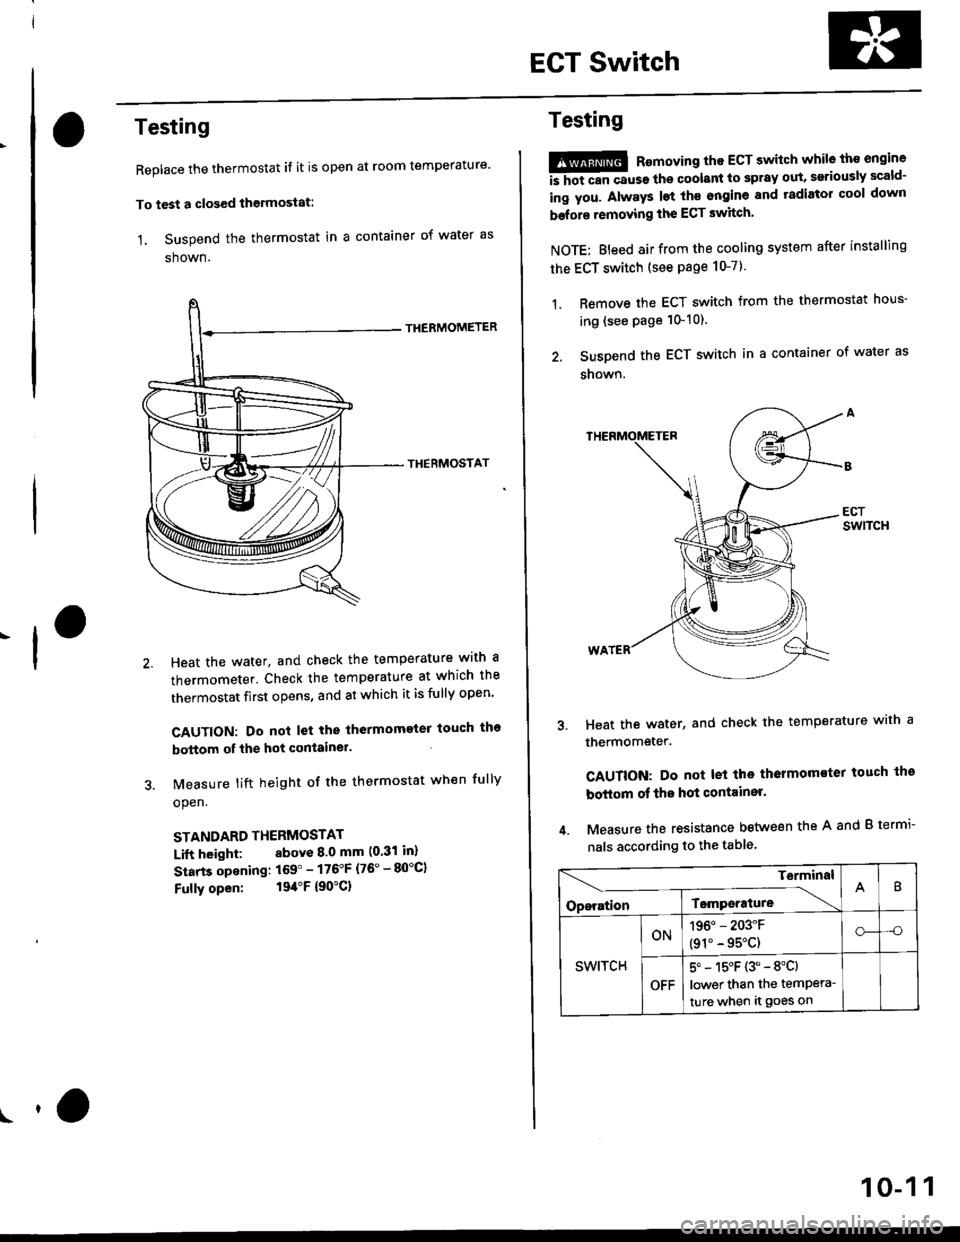 HONDA CIVIC 1999 6.G Workshop Manual EGT Switch
-f
Testing
Replace the thermostat if it is open at room temperature
To test a closed thermostat:
1, Suspend the thermostat in a container of water as
shown.
THEBMOMETER
THERMOSTAT
Heat the